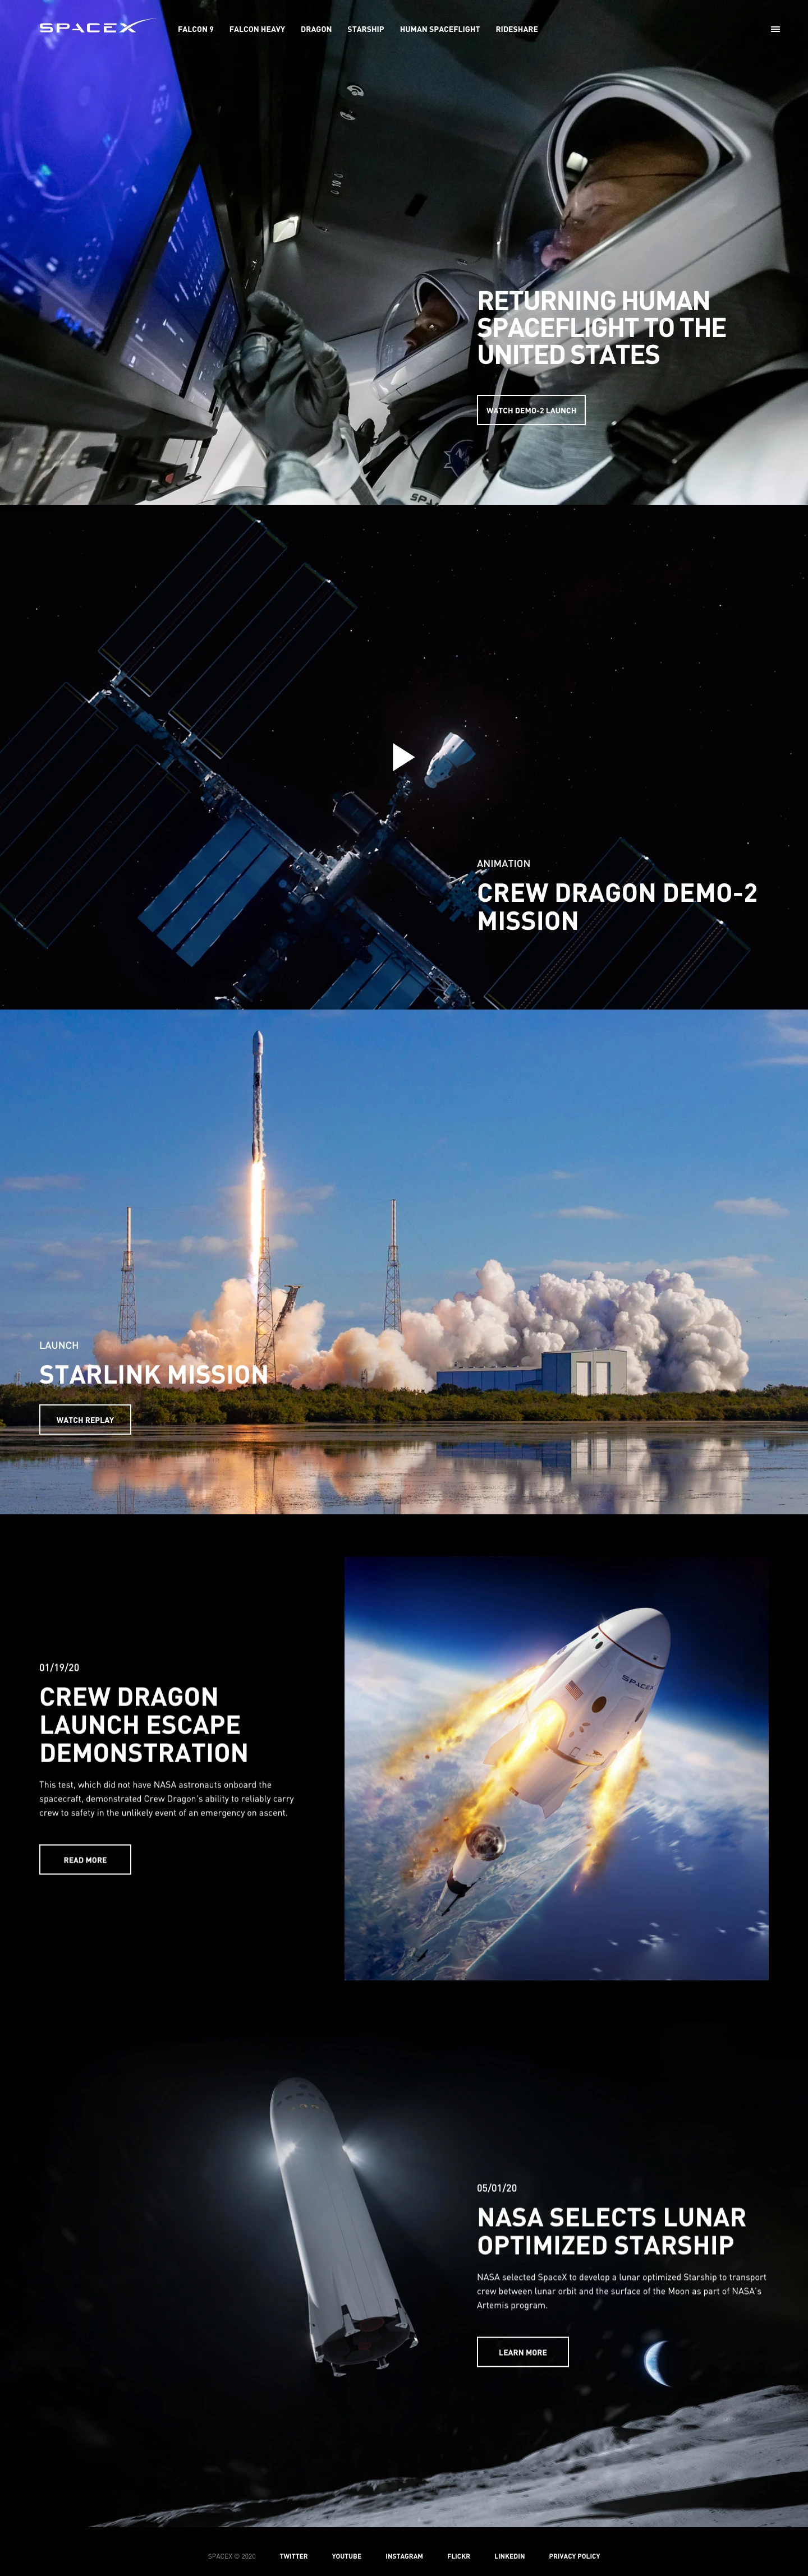 SpaceX Landing Page Example: SpaceX designs, manufactures and launches the world's most advanced rockets and spacecraft